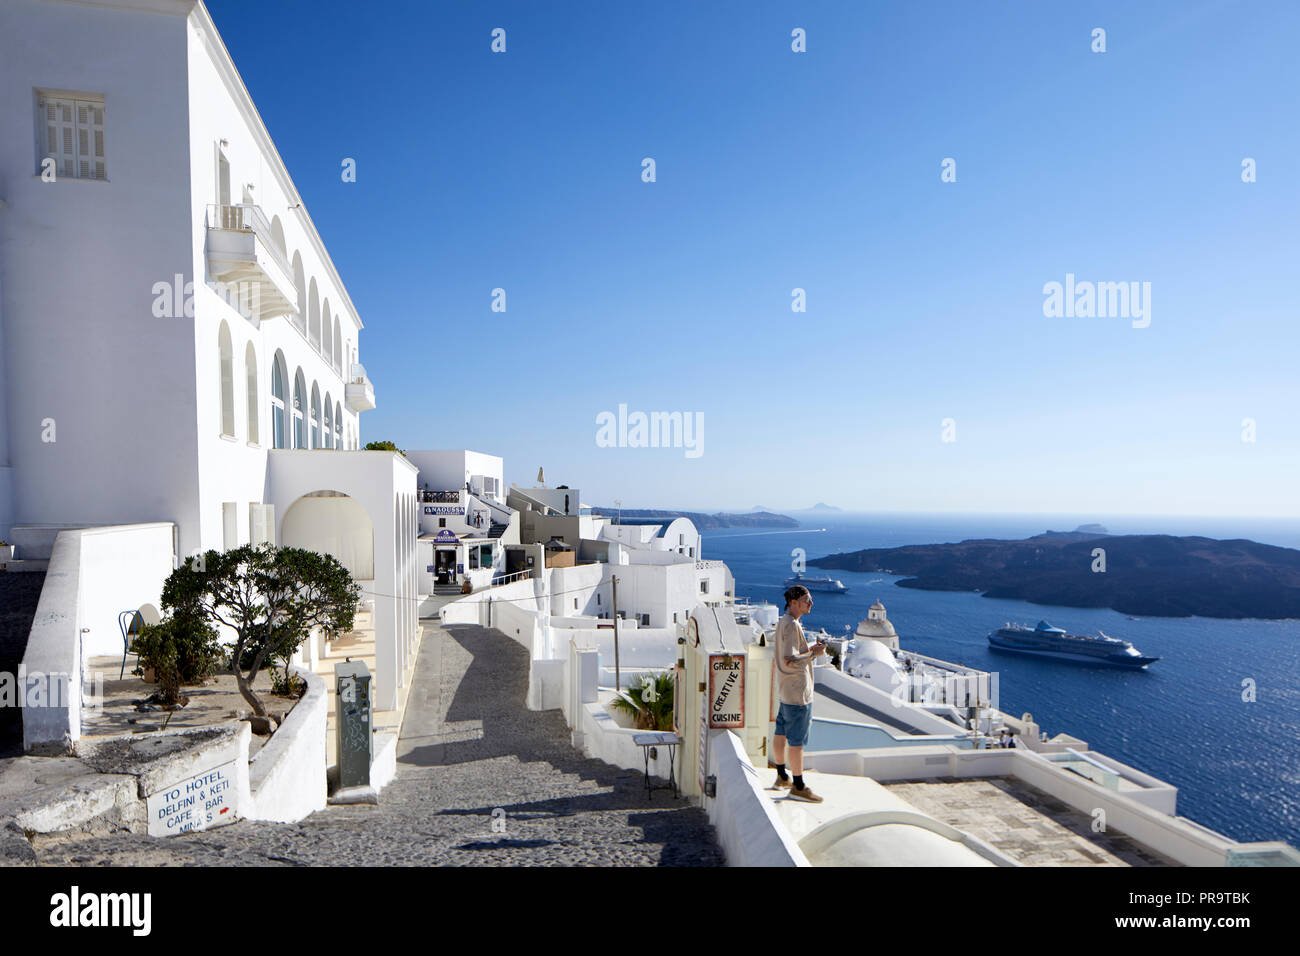 view from Aressana Spa Hotel and Suites Fira, Santorini, a Cyclades group of islands in Greece, tourists walking up the steep hill Stock Photo